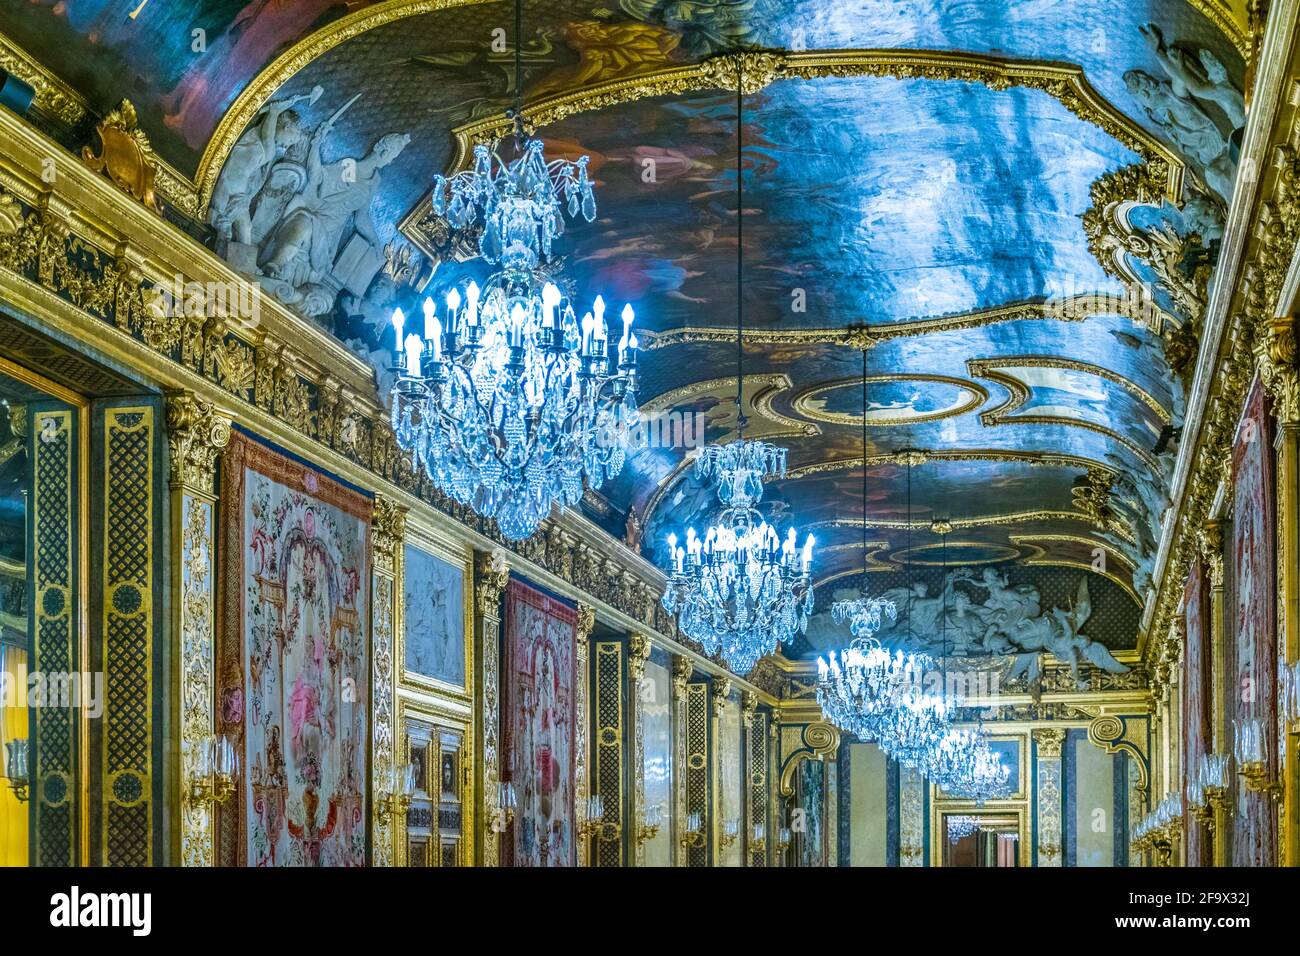 STOCKHOLM, SWEDEN, AUGUST 18, 2016: View of a corridor with many chandeliers of the Kungliga slottet castle in Gamla Stan, Stockholm, Sweden Stock Photo